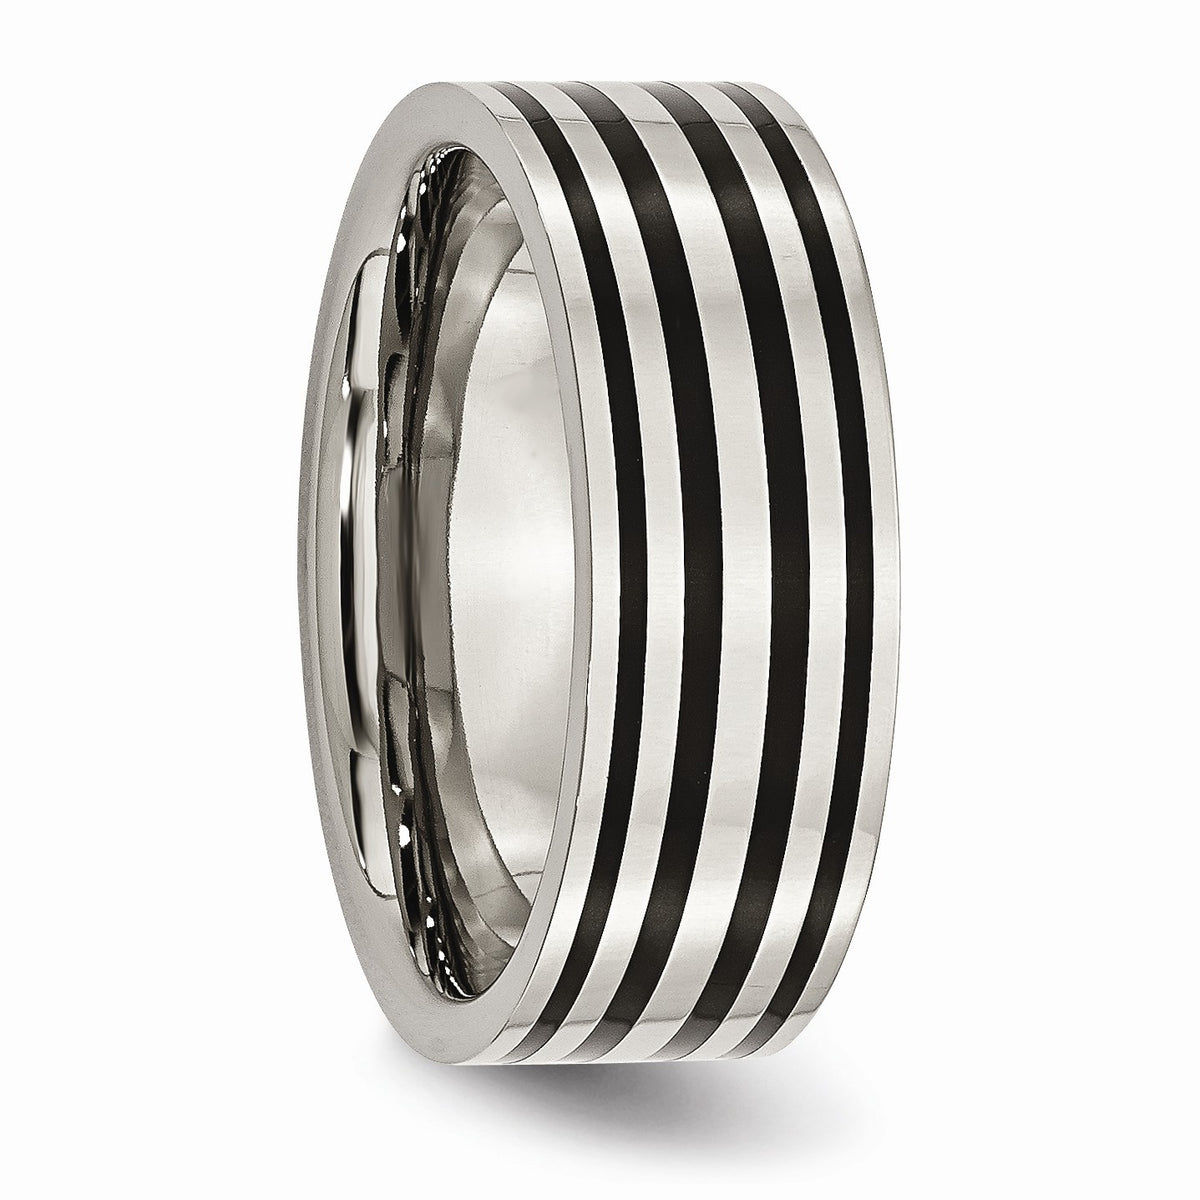 Alternate view of the Titanium and Black Enamel, 8mm Striped Unisex Comfort Fit Band by The Black Bow Jewelry Co.